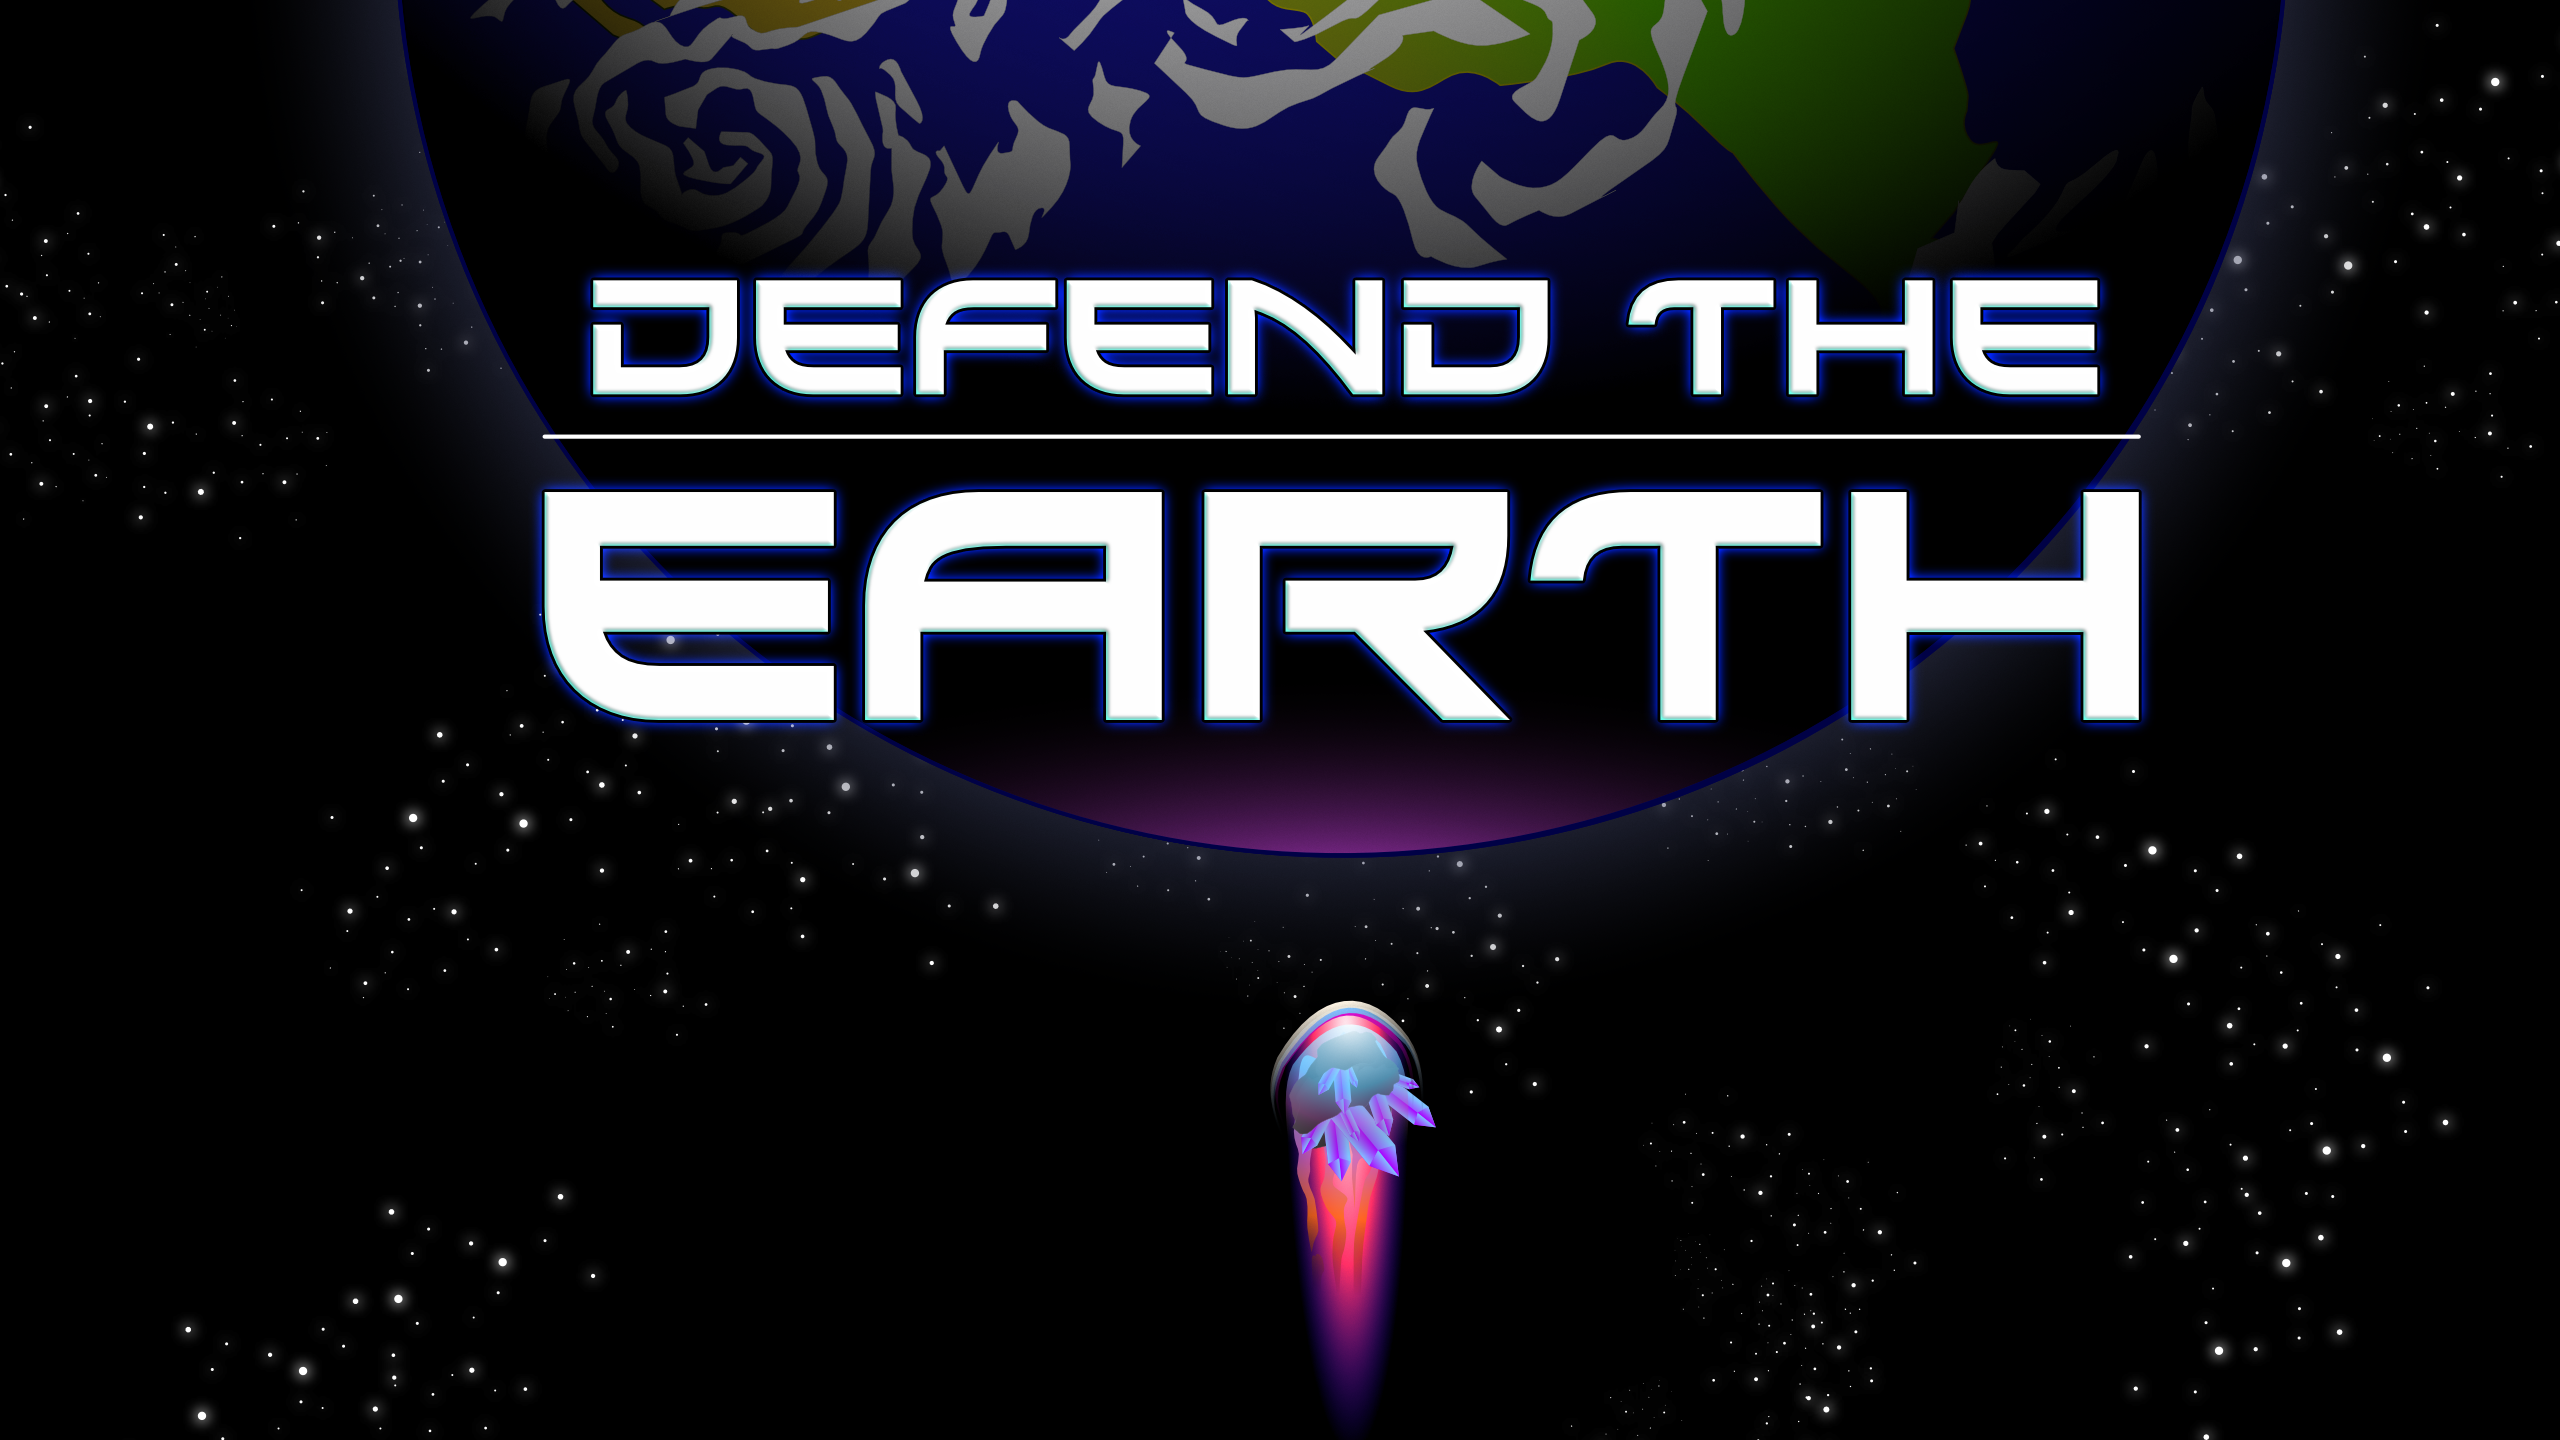 Defend The Earth